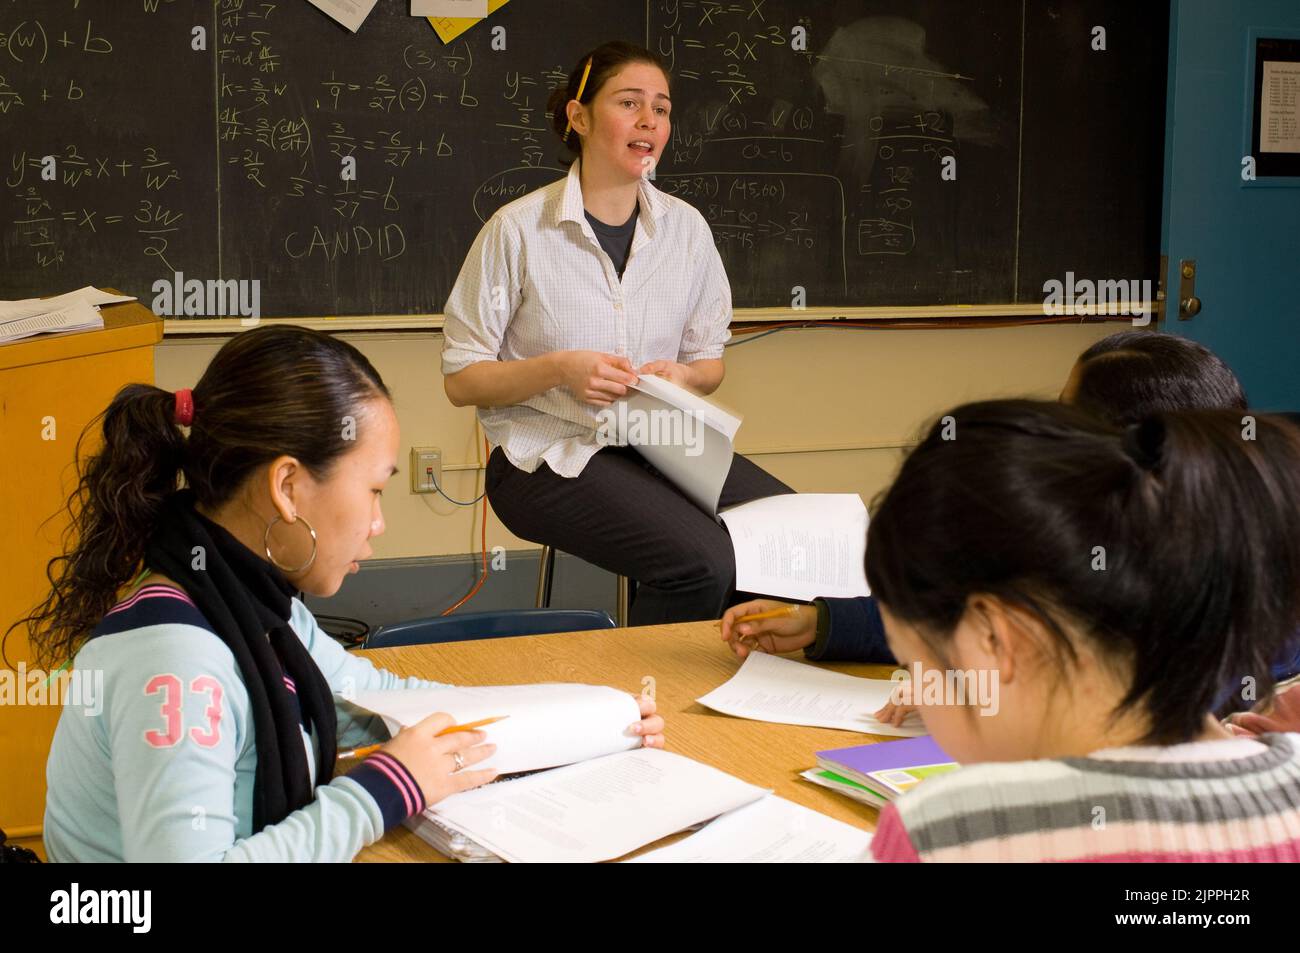 Education High School female teacher talking to class, pencil behind her ear, female students following subject with papers on table Stock Photo